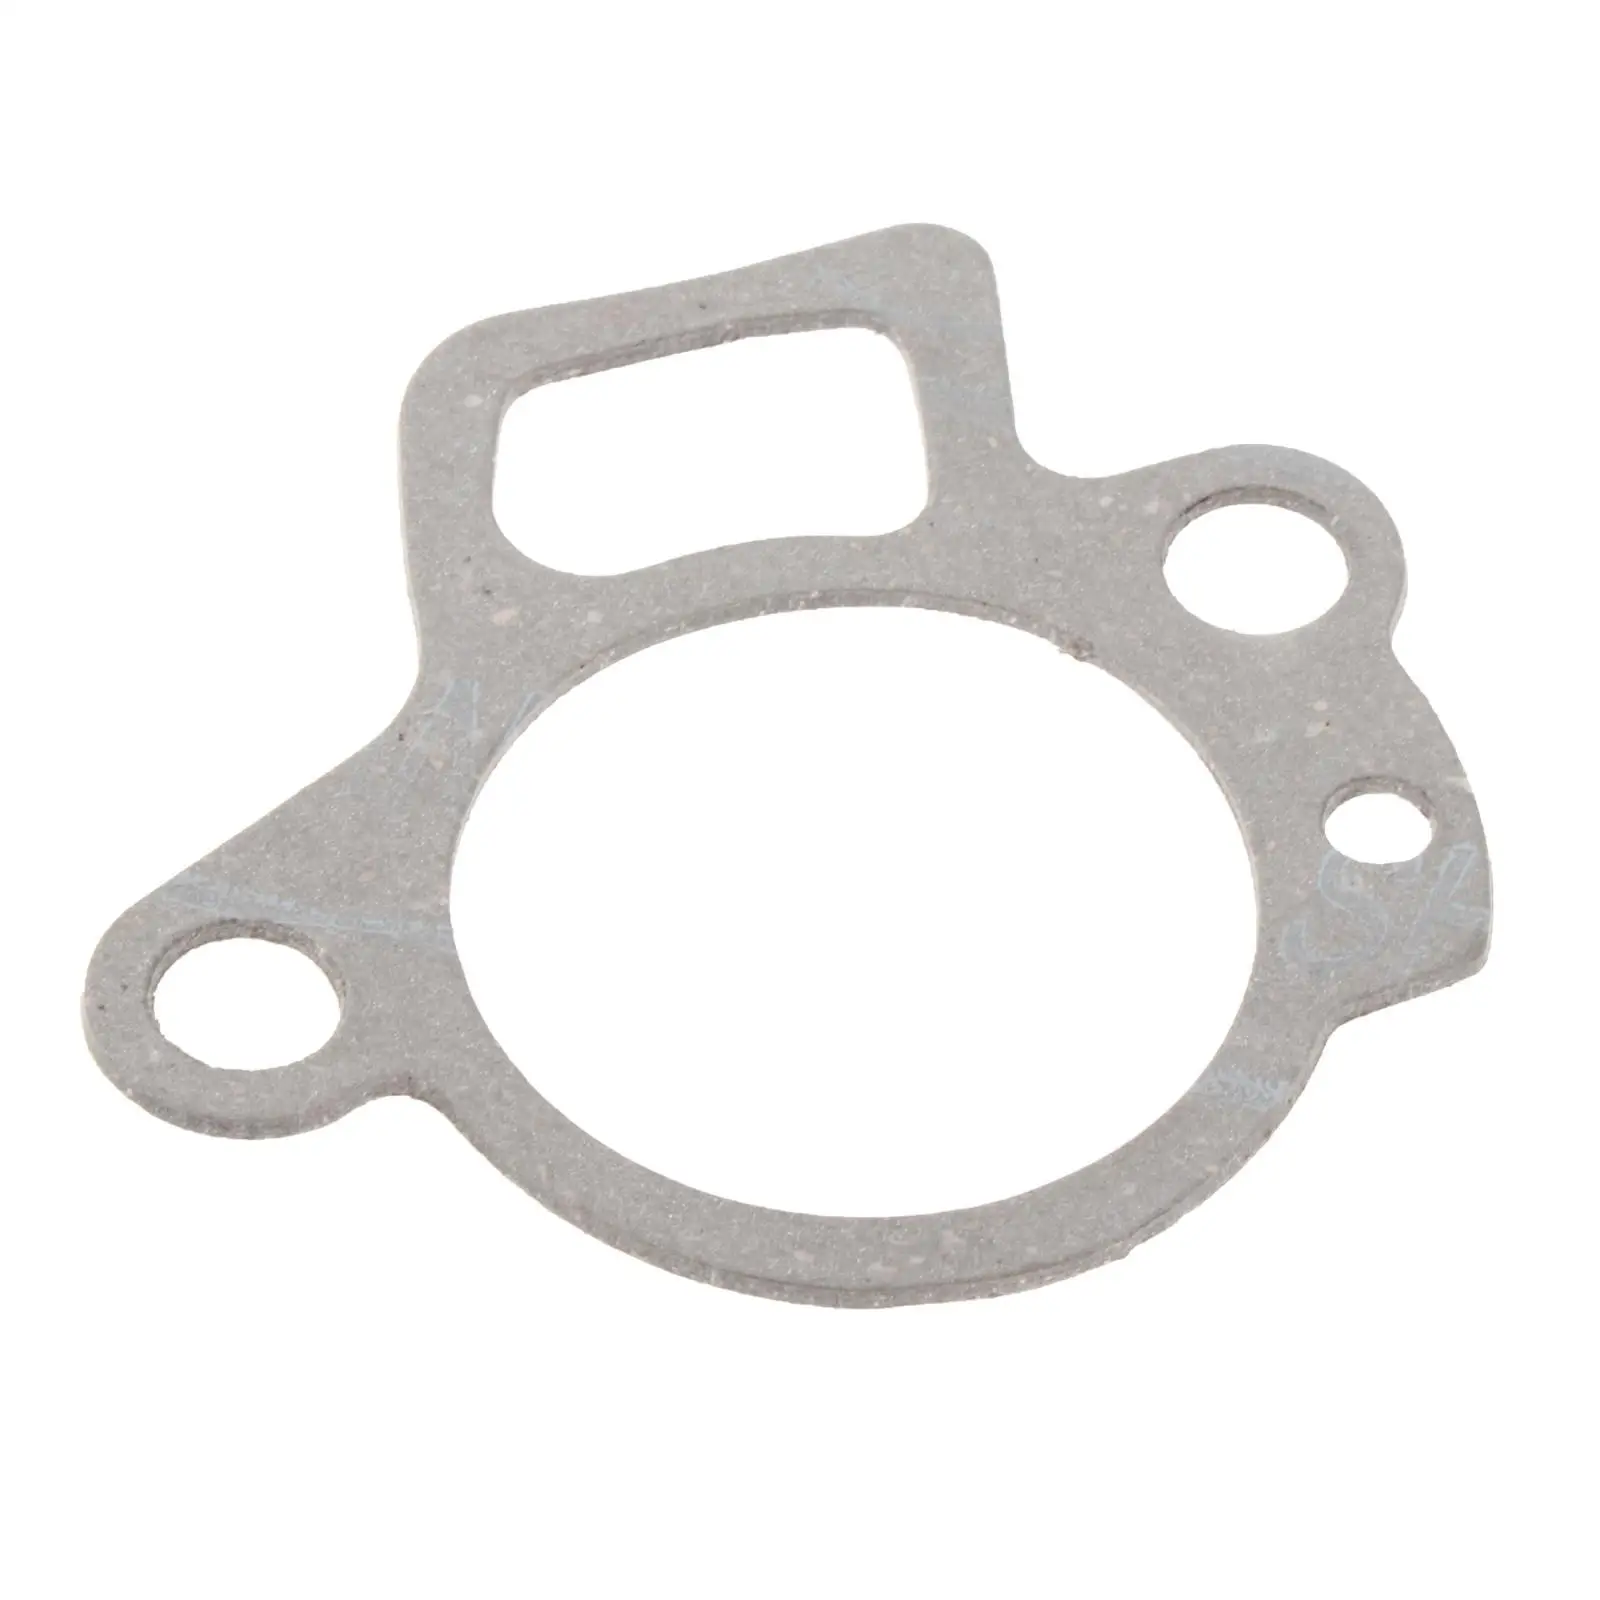 541-25 Thermostat Gasket 27-824853 Fits for Yamaha Outboard Engine 9.9-70 HP